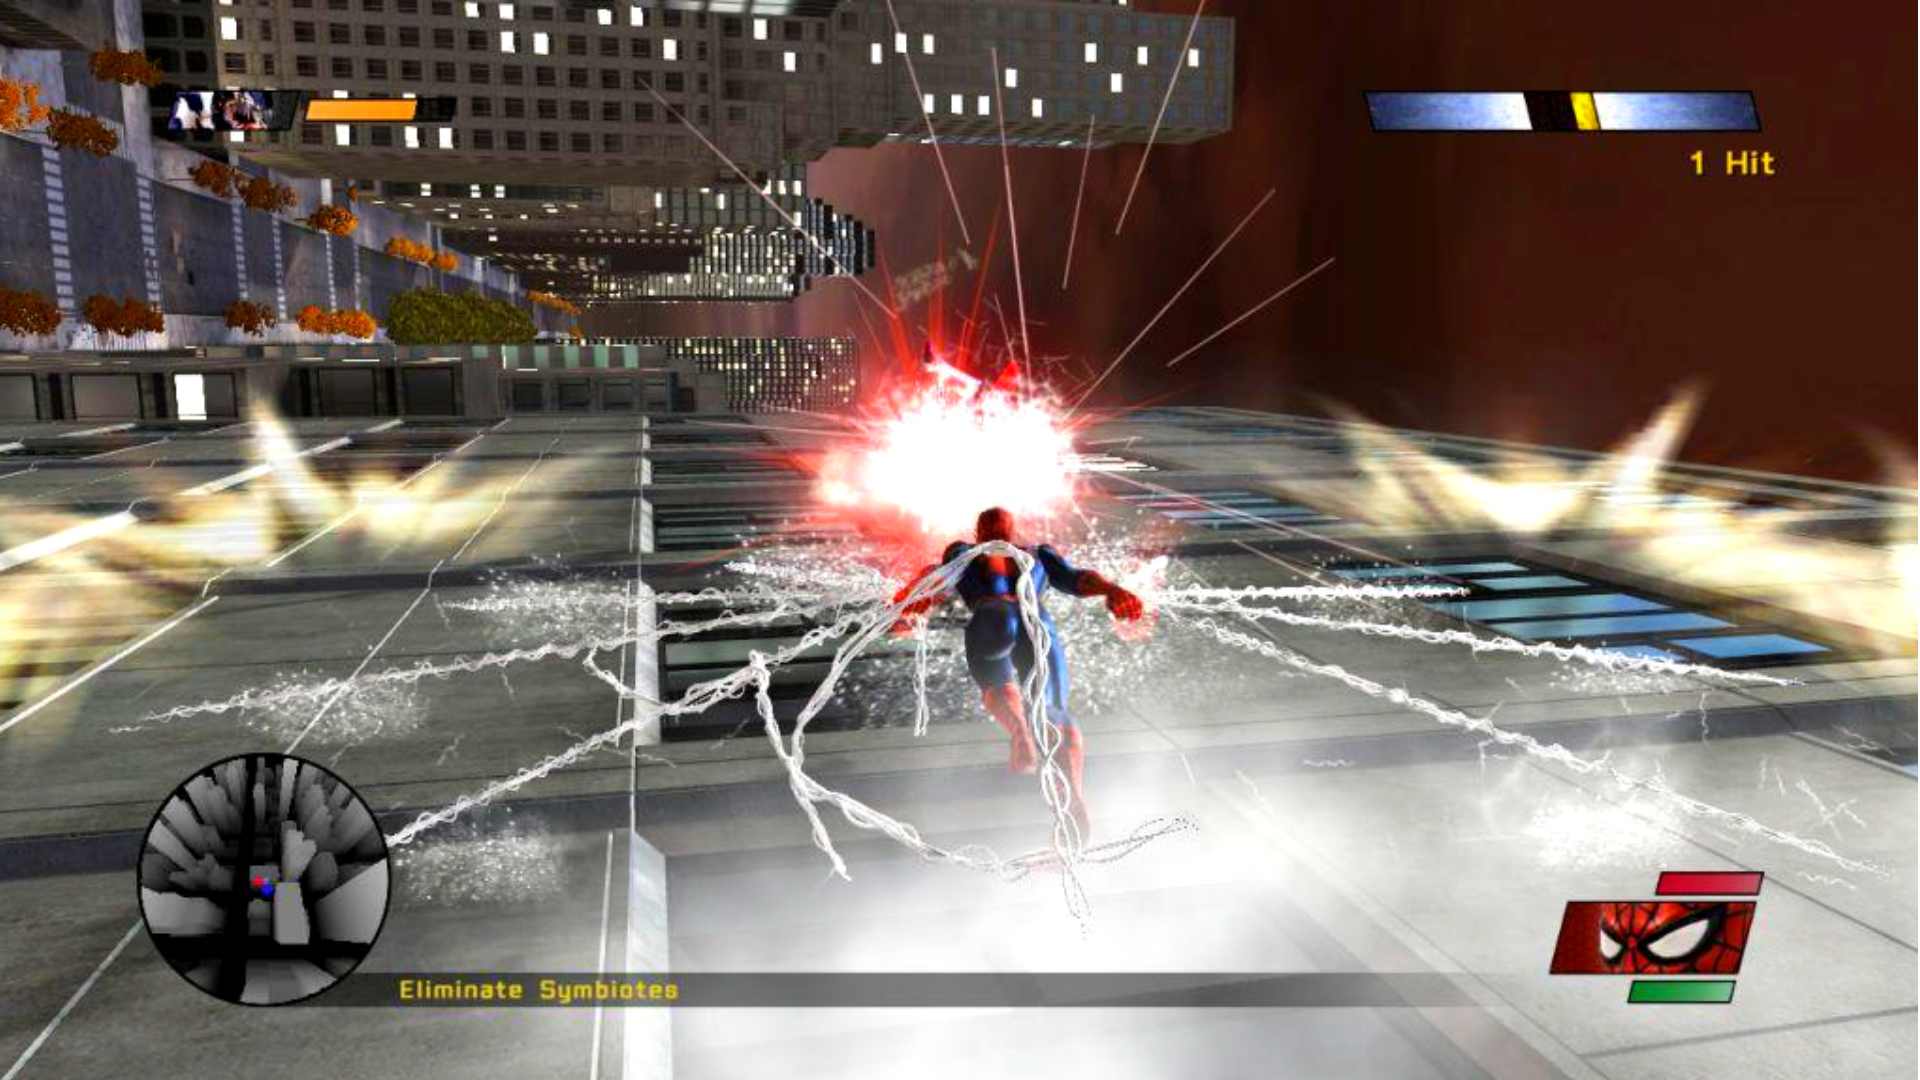 Spider-Man Web of Shadows features the greatest combat seen in Spider-Man games to date.